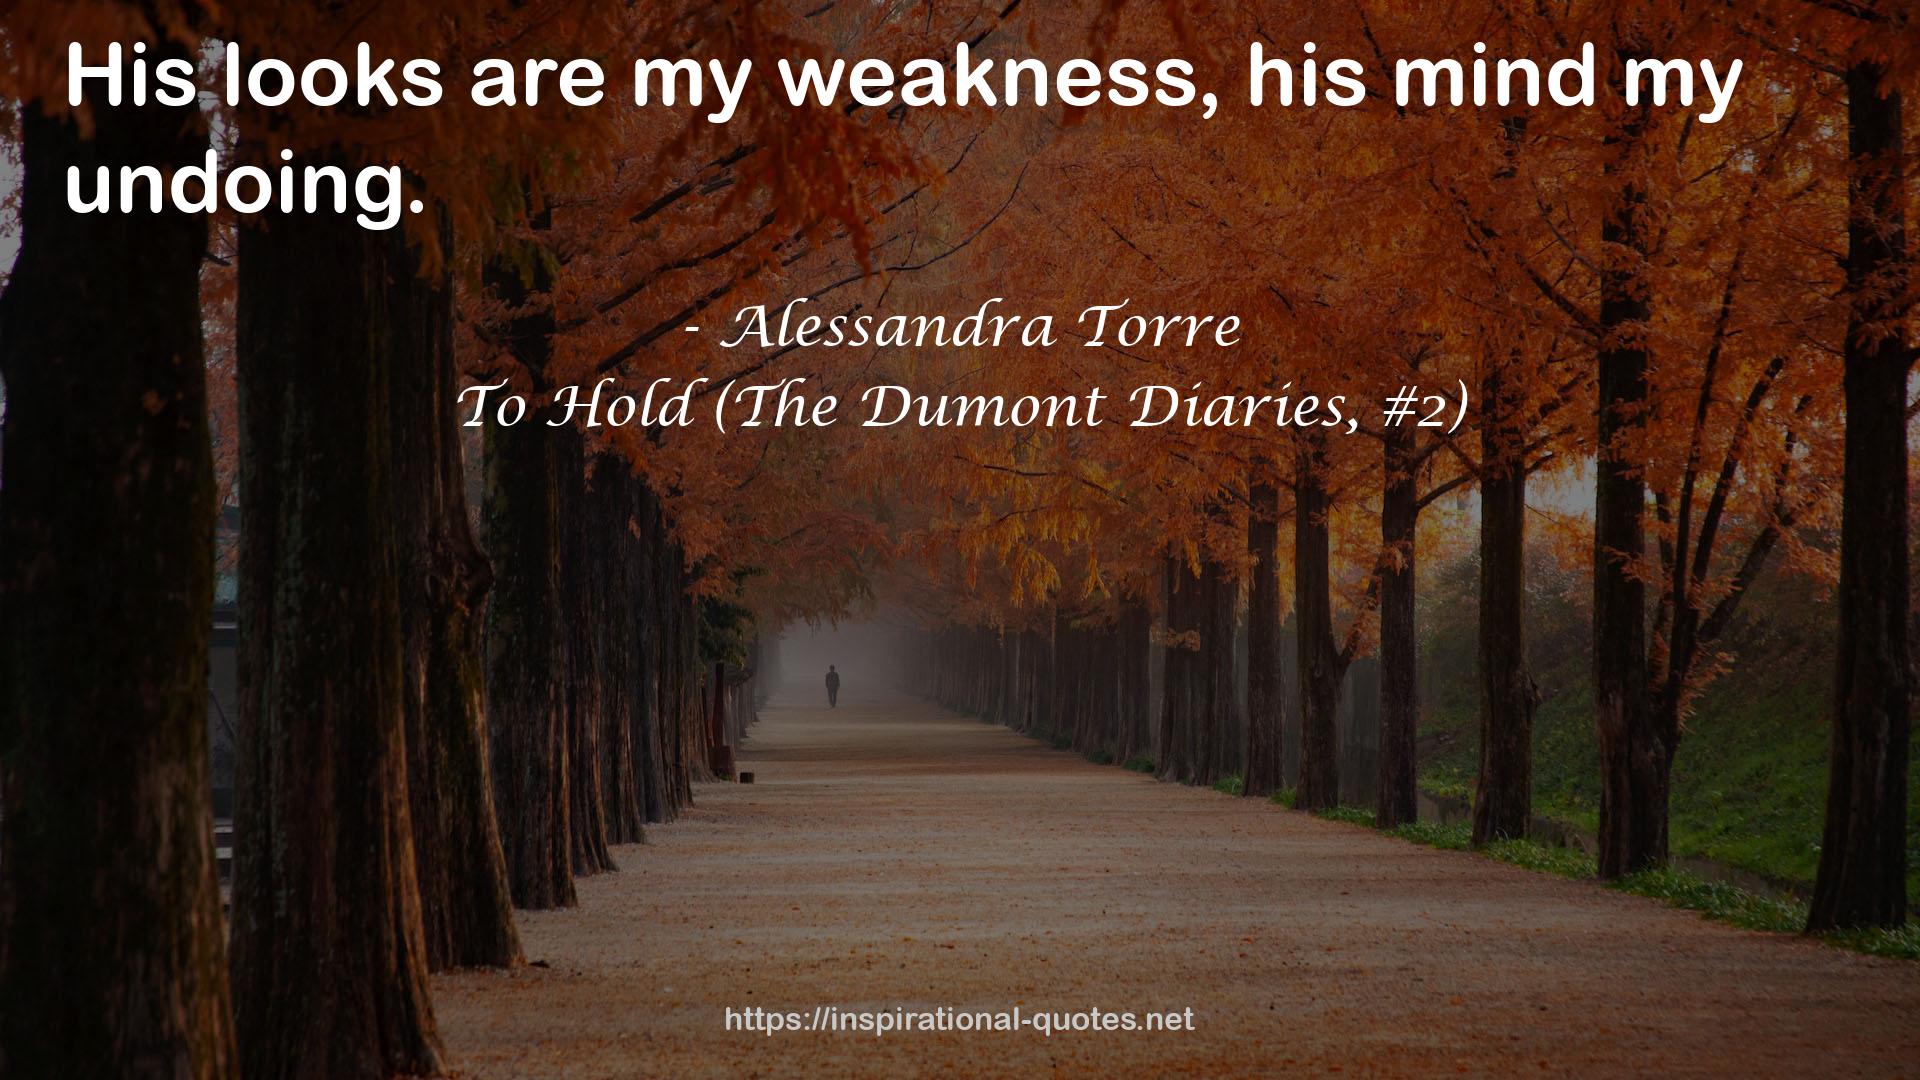 To Hold (The Dumont Diaries, #2) QUOTES